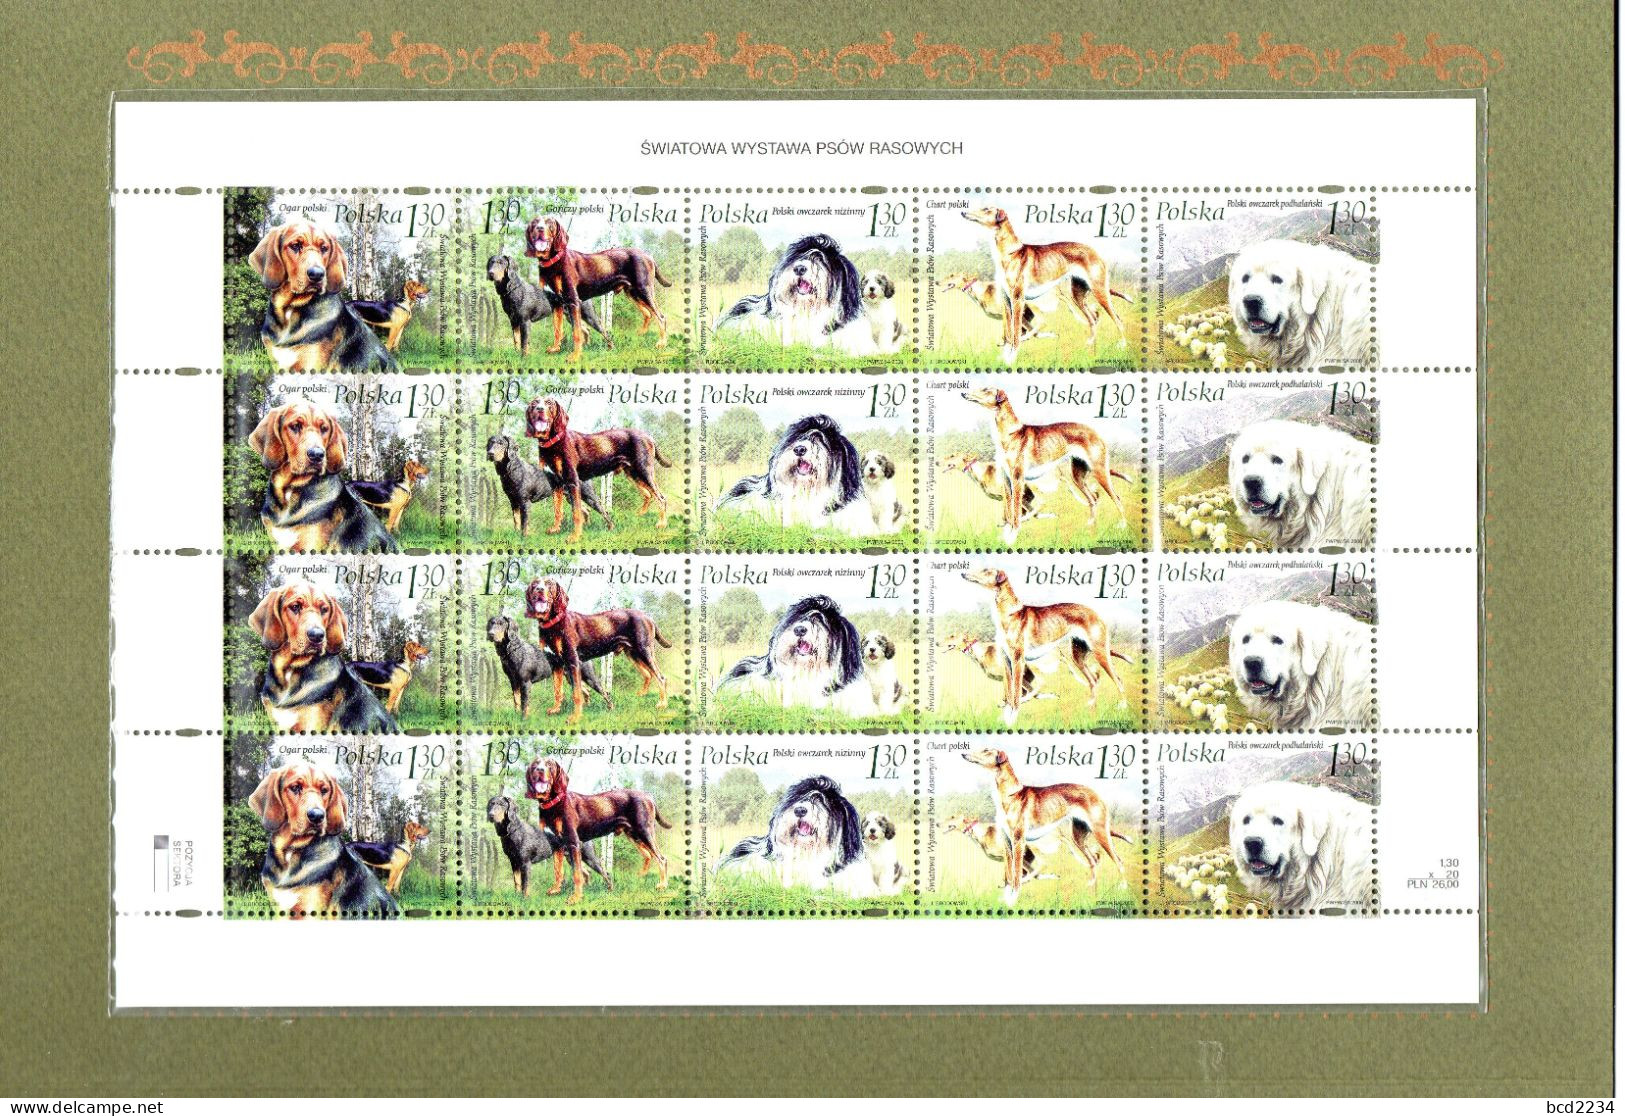 POLAND 2006 RARE POLISH POST OFFICE LIMITED EDITION FOLDER: SHEET OF 20 STAMPS OF WORLD EXHIBITION SHOW PEDIGREE DOGS - Covers & Documents